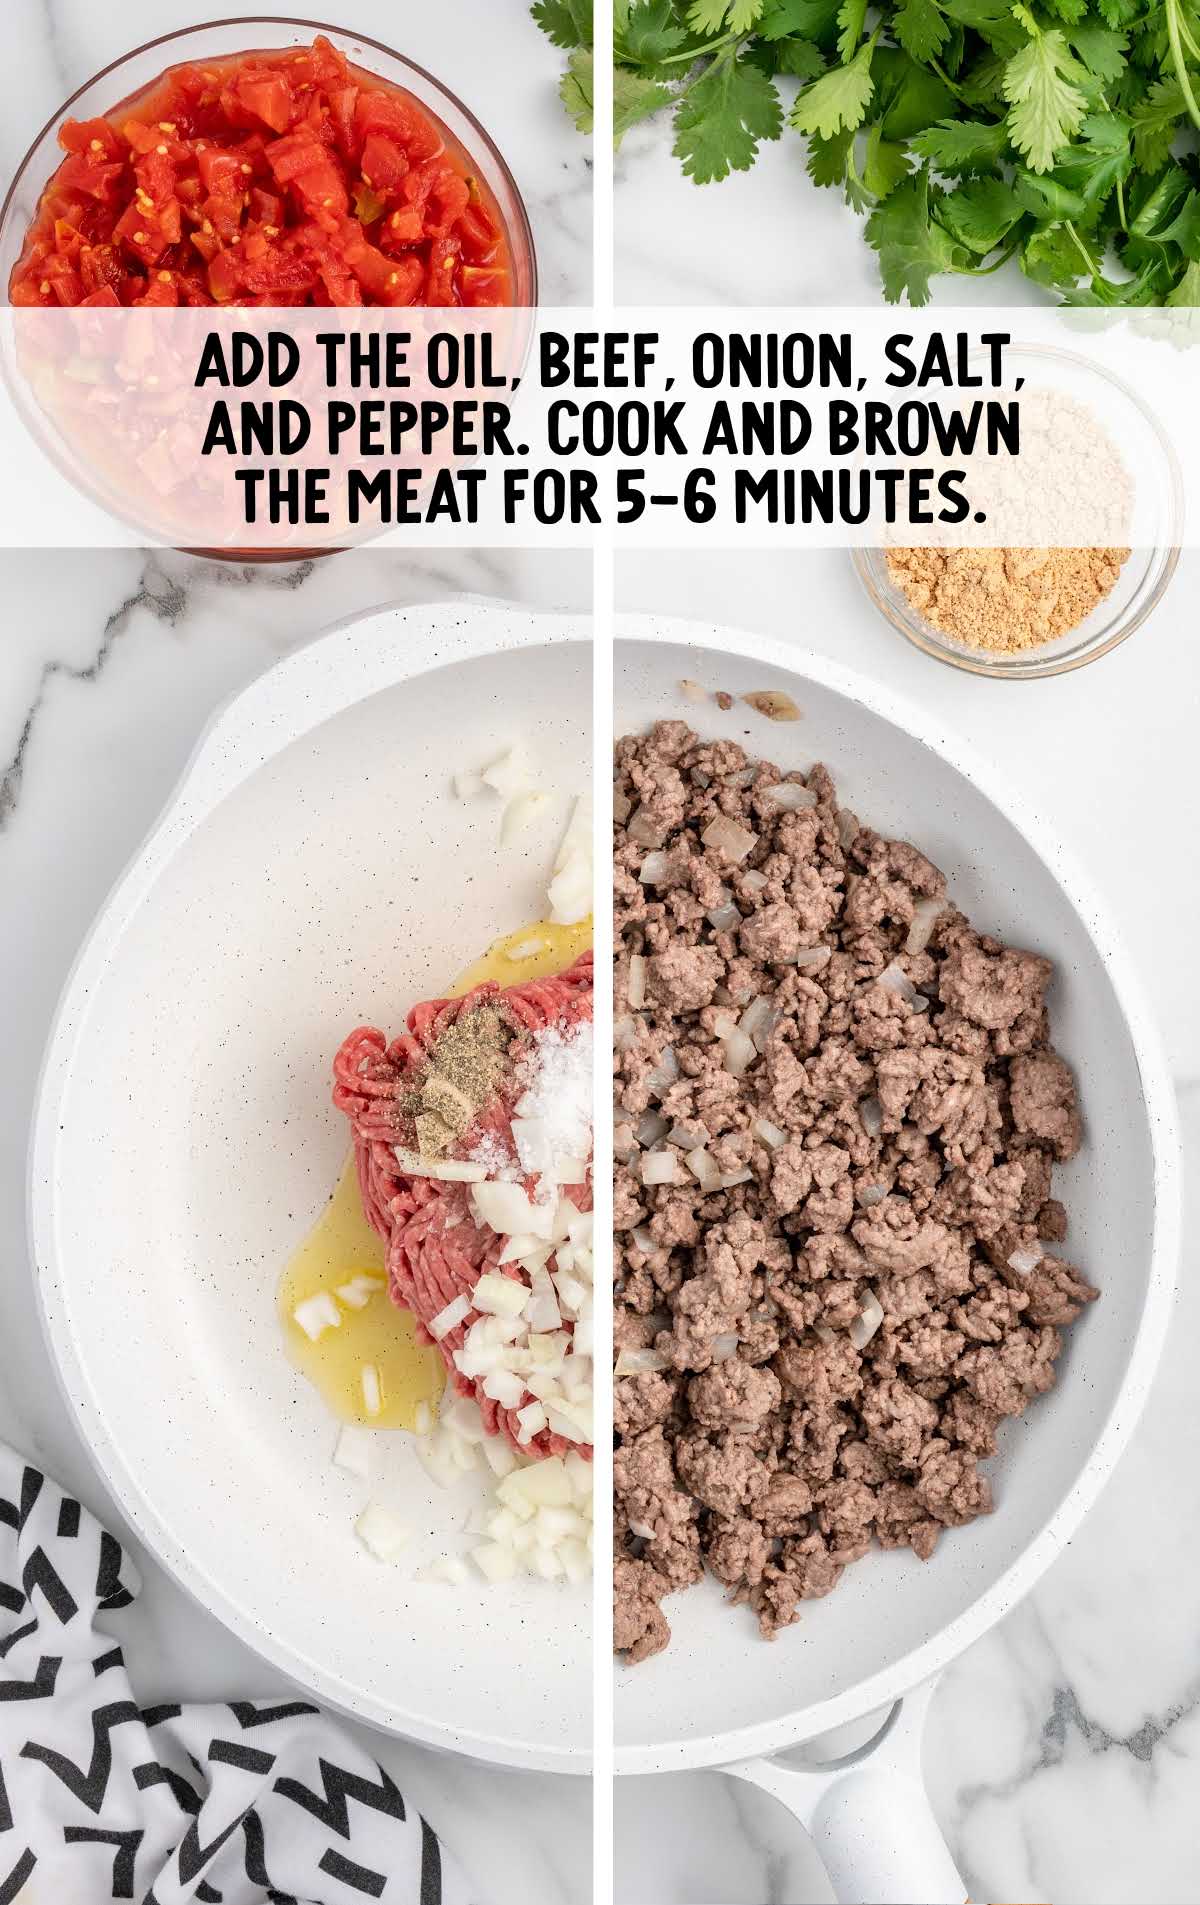 olive oil, ground beef, diced yellow onion, salt, and black pepper cooked in a skillet